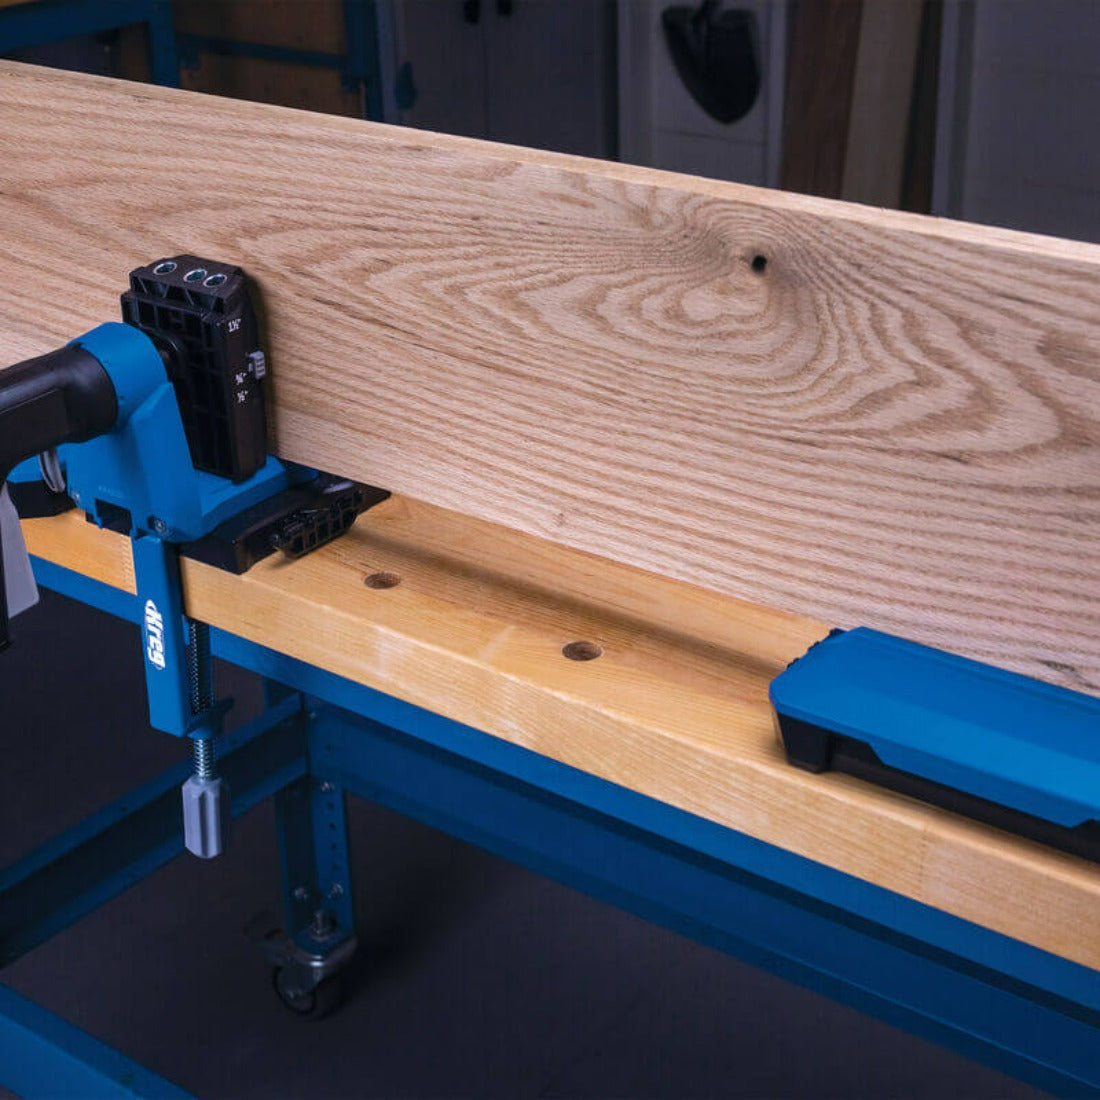 image shows long plank drilled with 520 jig and docking station supports holding up the plank to keep level